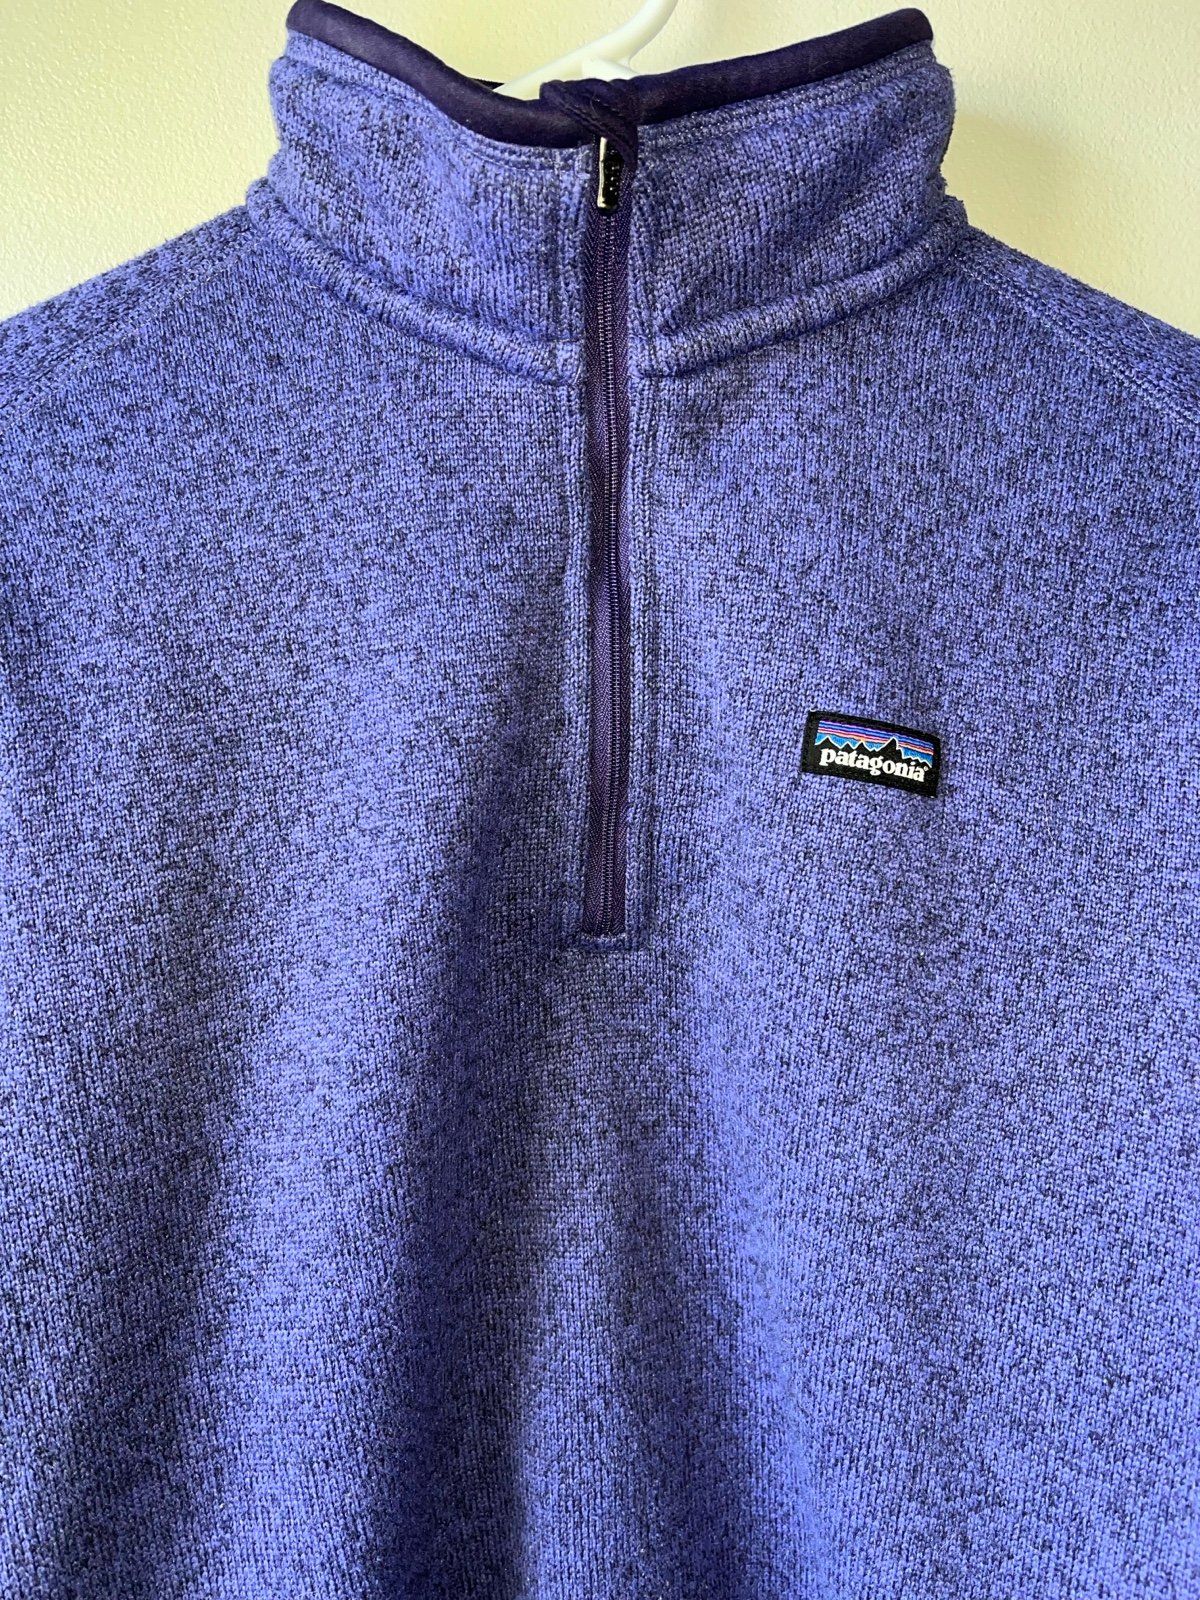 reasonable price Patagonia Better Sweater 1/4 Zip Fleece Pullover kQ9vhstHZ US Outlet